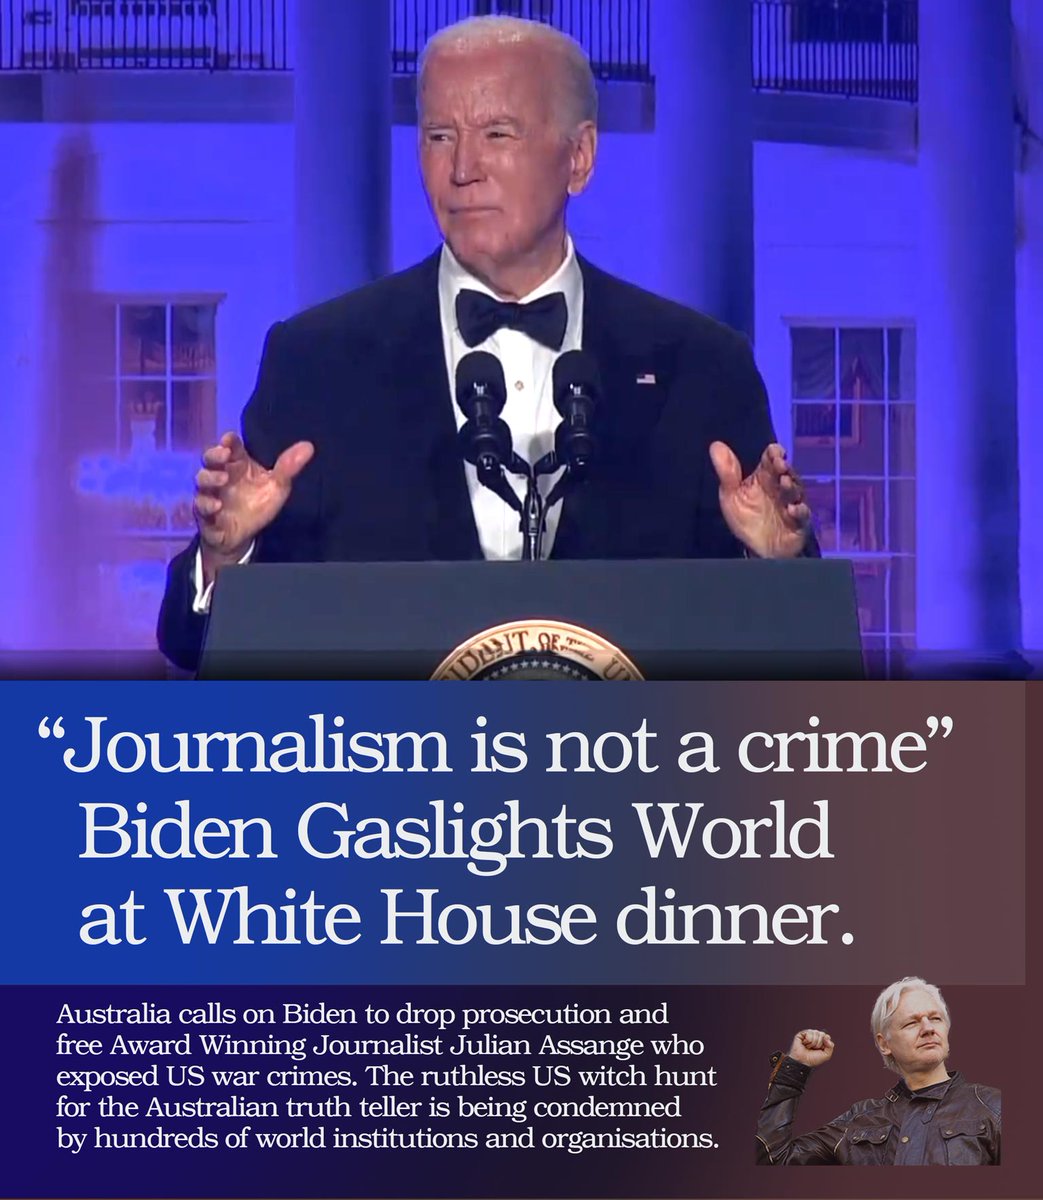 Biden Gaslights the world at White House Dinner. Australia calls on Biden to drop prosecution & free Australian Julian Assange who exposed US war crimes. The ruthless US witch hunt for the award winning journalist is condemned by hundreds of world institutions and organisations.